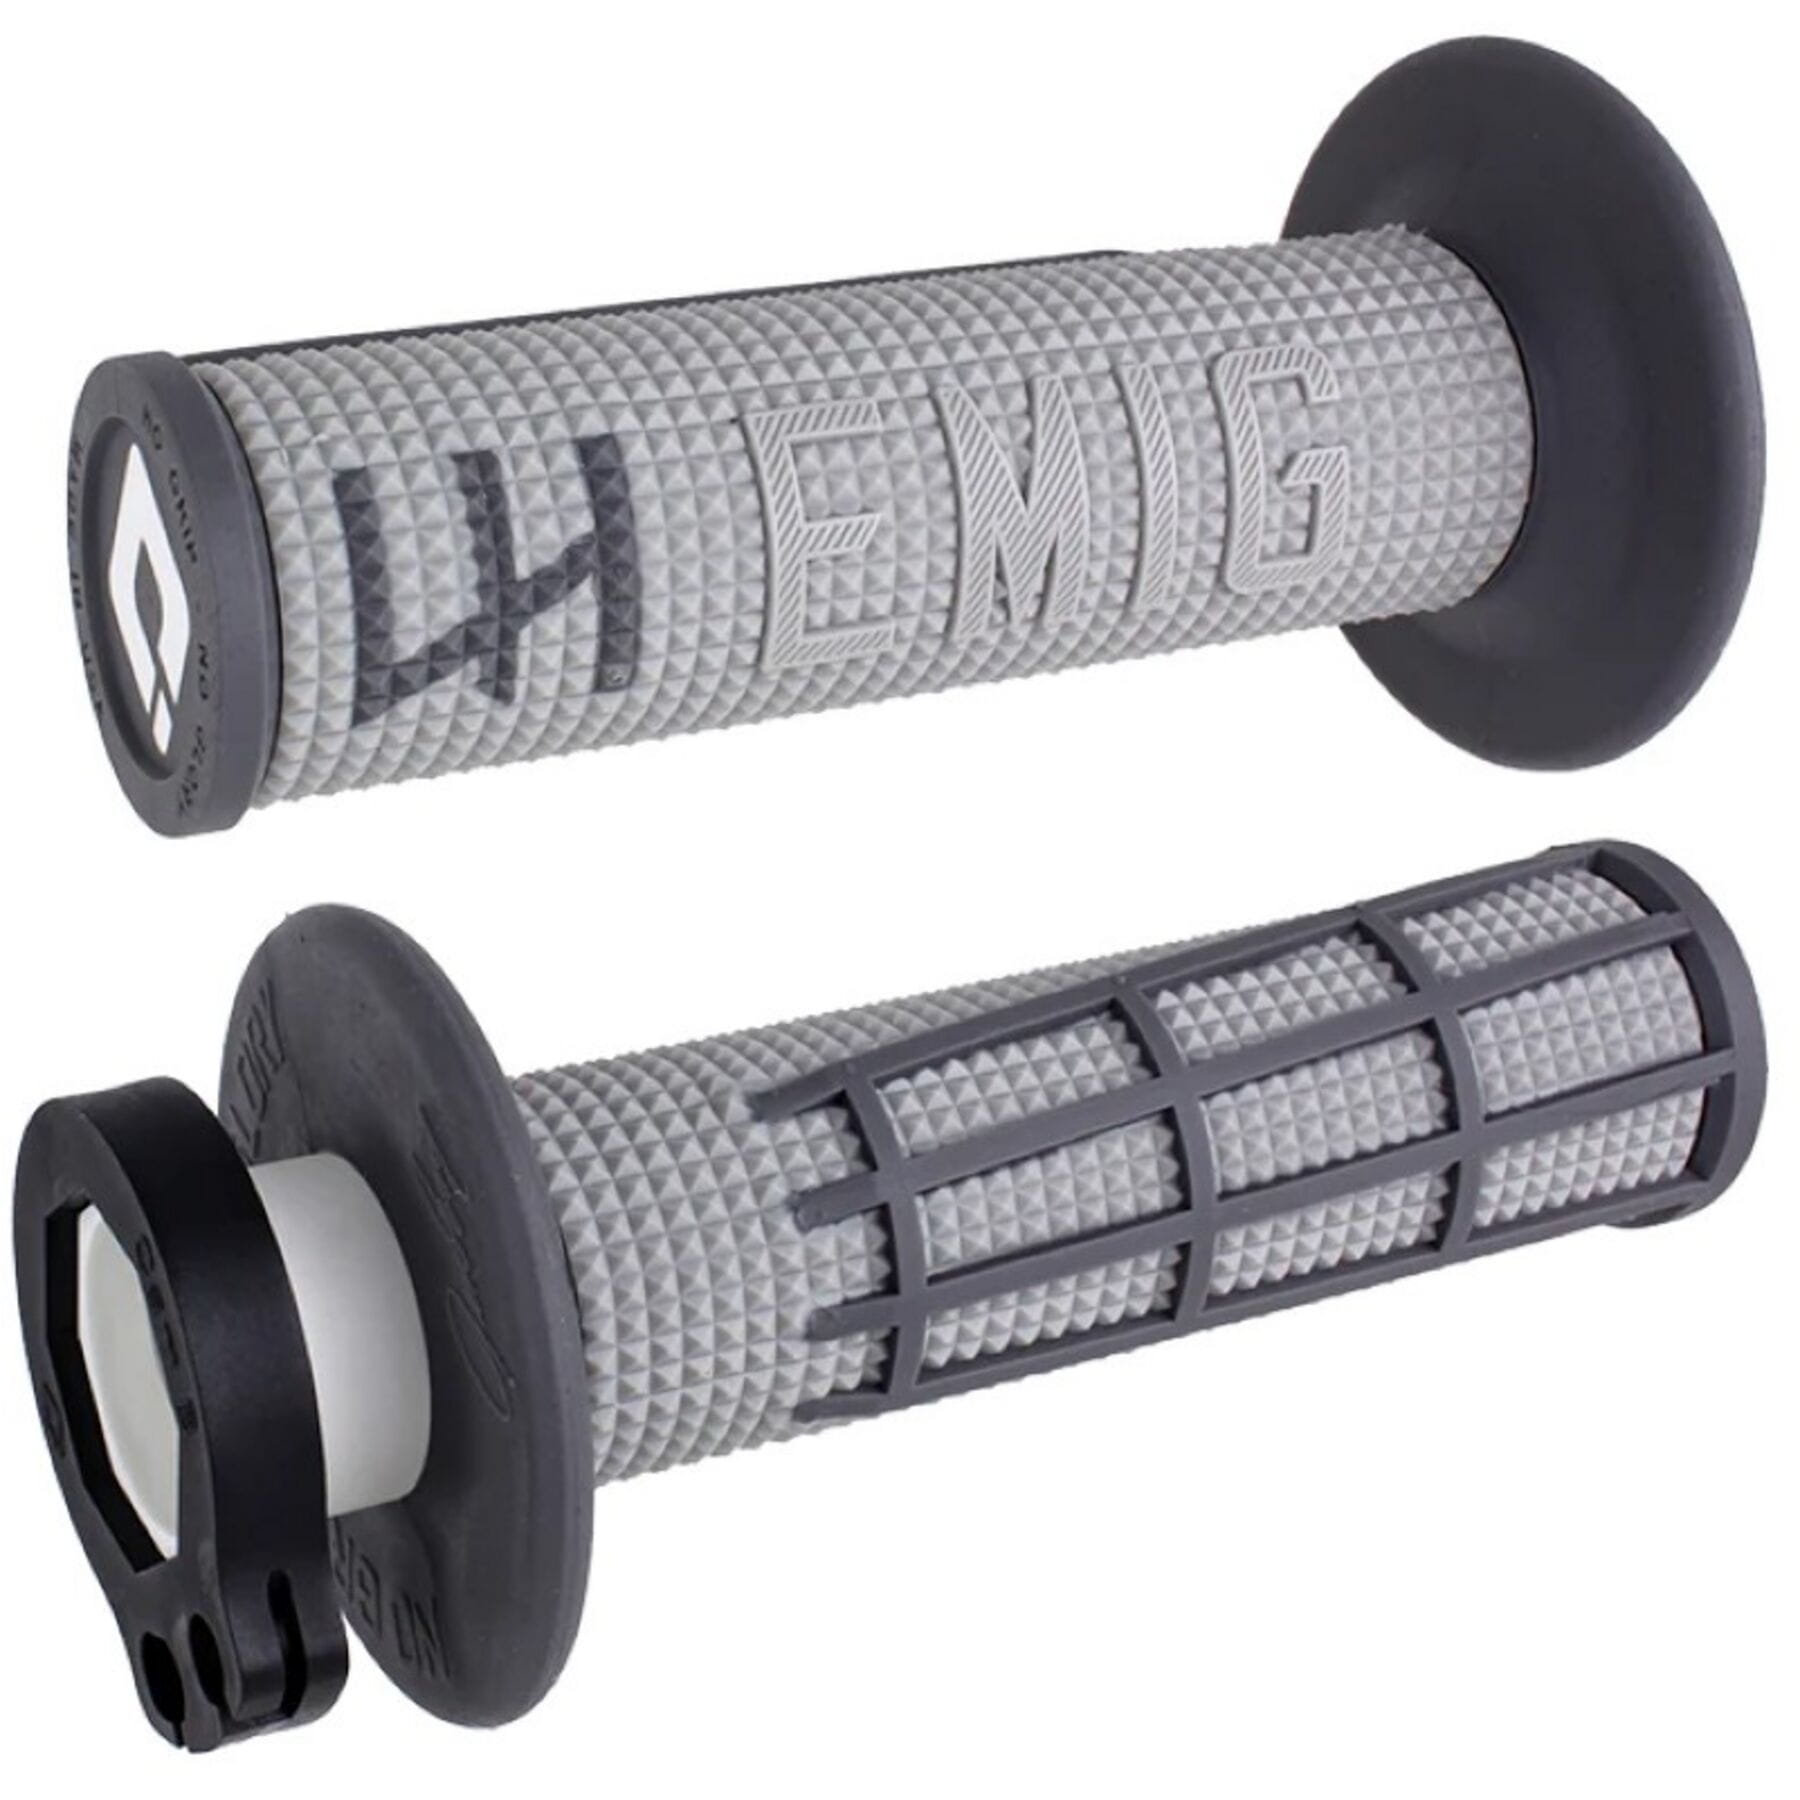 EMIG 2.0 Lock On Grip for bikes in Grey and Graphite colors